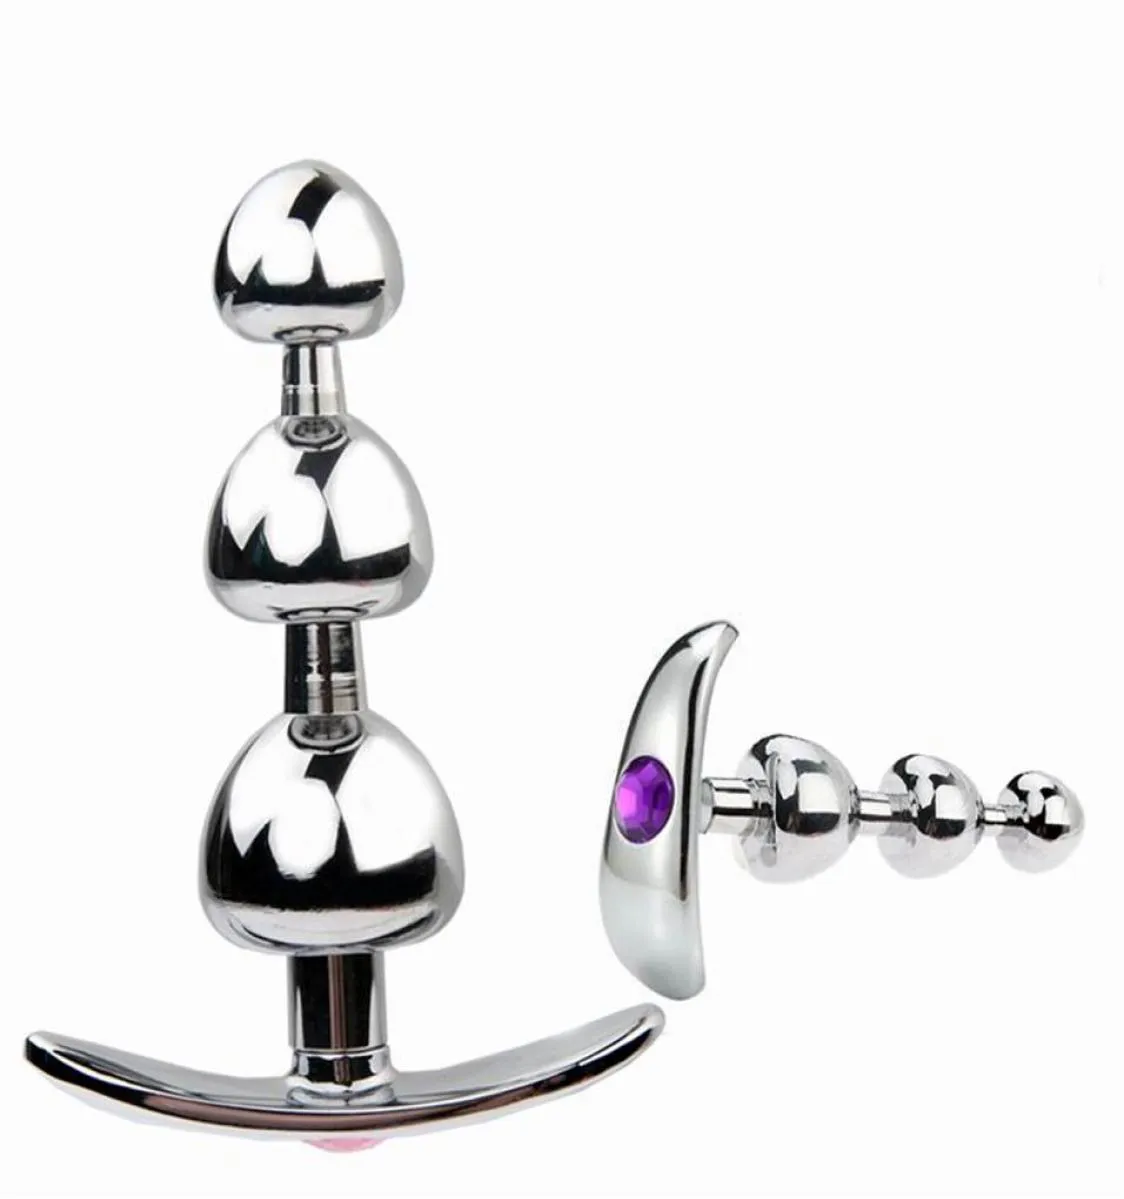 Metal Outdoor wear Butt Plugs Beads Vaginal Massage Erotic Products Anal Plug Prostate Stimulation Bdsm Toys for Men and Women287n8254543